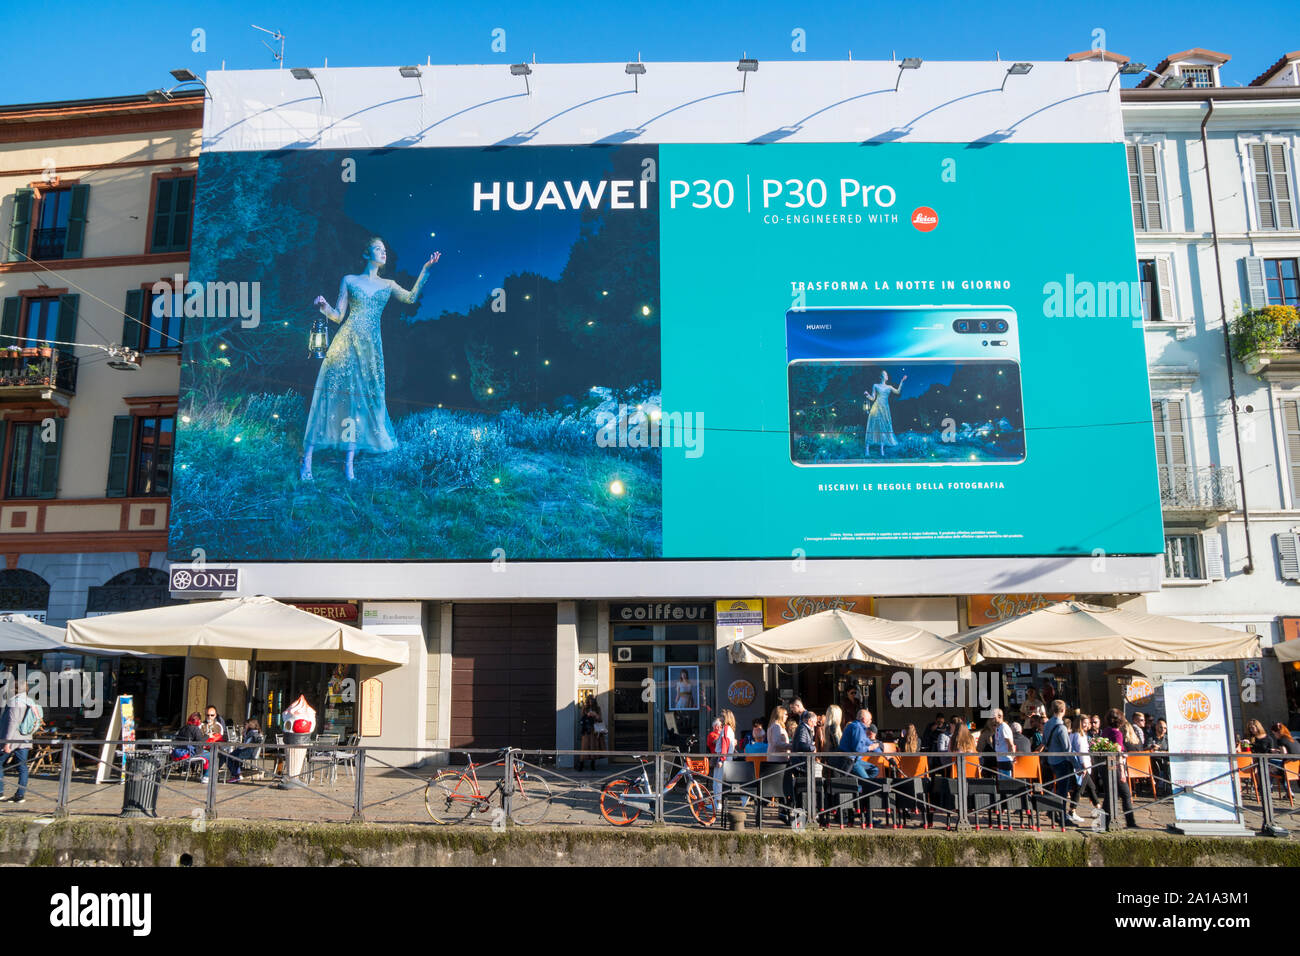 Milan, Italy: Giant advertising billboard for the promotion of the P30 and P30 Plus, the new smartphones from Huawei, in the Navigli district Stock Photo